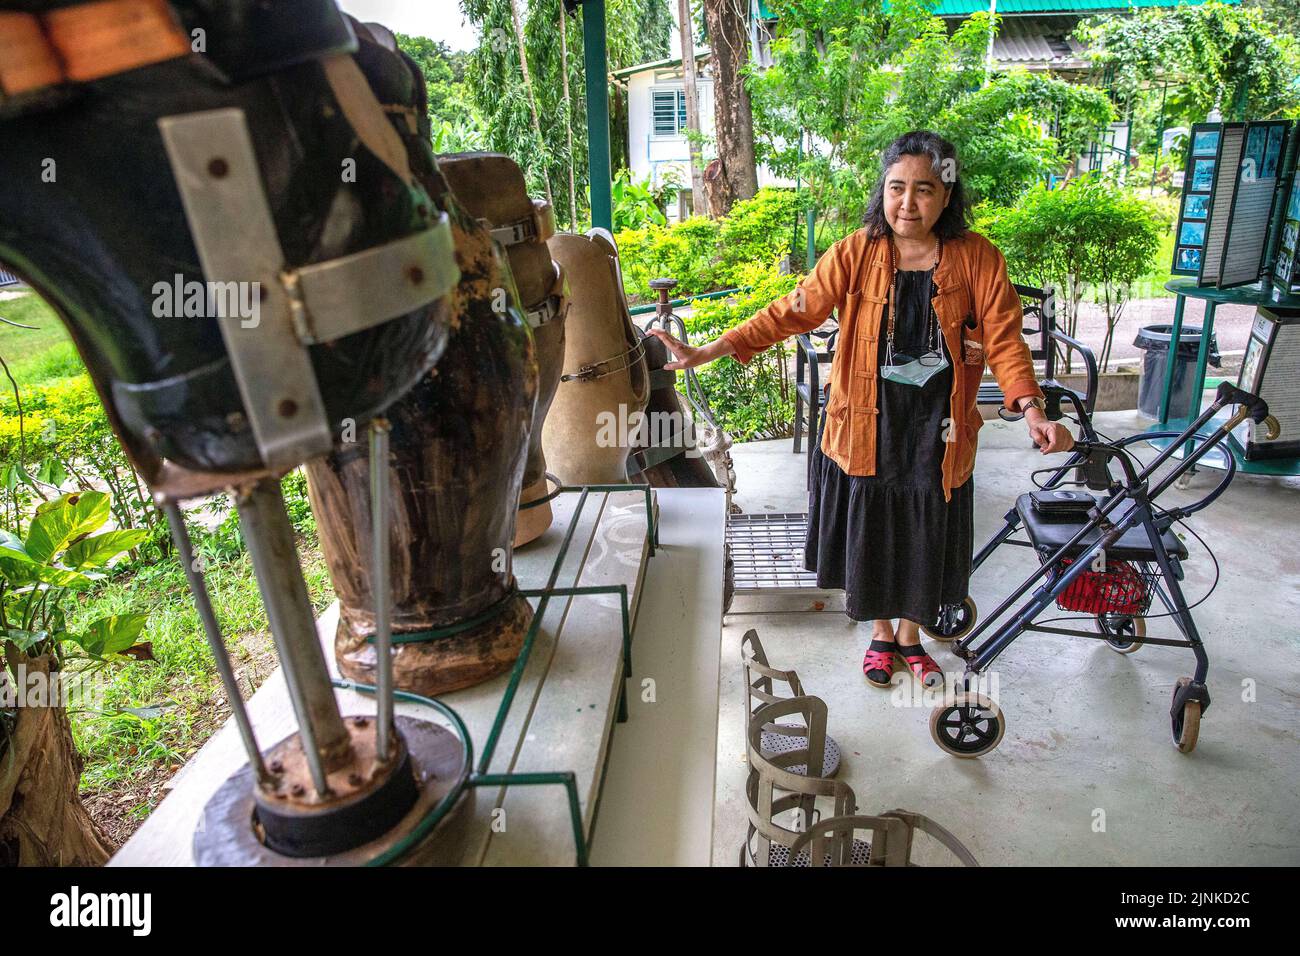 (220812) -- LAMPANG, Aug. 12, 2022 (Xinhua) -- Soraida Salwala introduces prosthetic legs made for elephants at the 'Friends of the Asian Elephant' elephant hospital in Lampang, Thailand, on Aug. 6, 2022.  Deep in the forest of Lampang province in northern Thailand, the hospital, named Friends of the Asian Elephant (FAE), is the first hospital in the world dedicated to treating injured elephants.   Since its establishment in 1993, the hospital has saved more than 5,000 elephants with illnesses varying from diarrhoea to eye diseases and injuries through car accidents or mine explosions.   TO GO Stock Photo